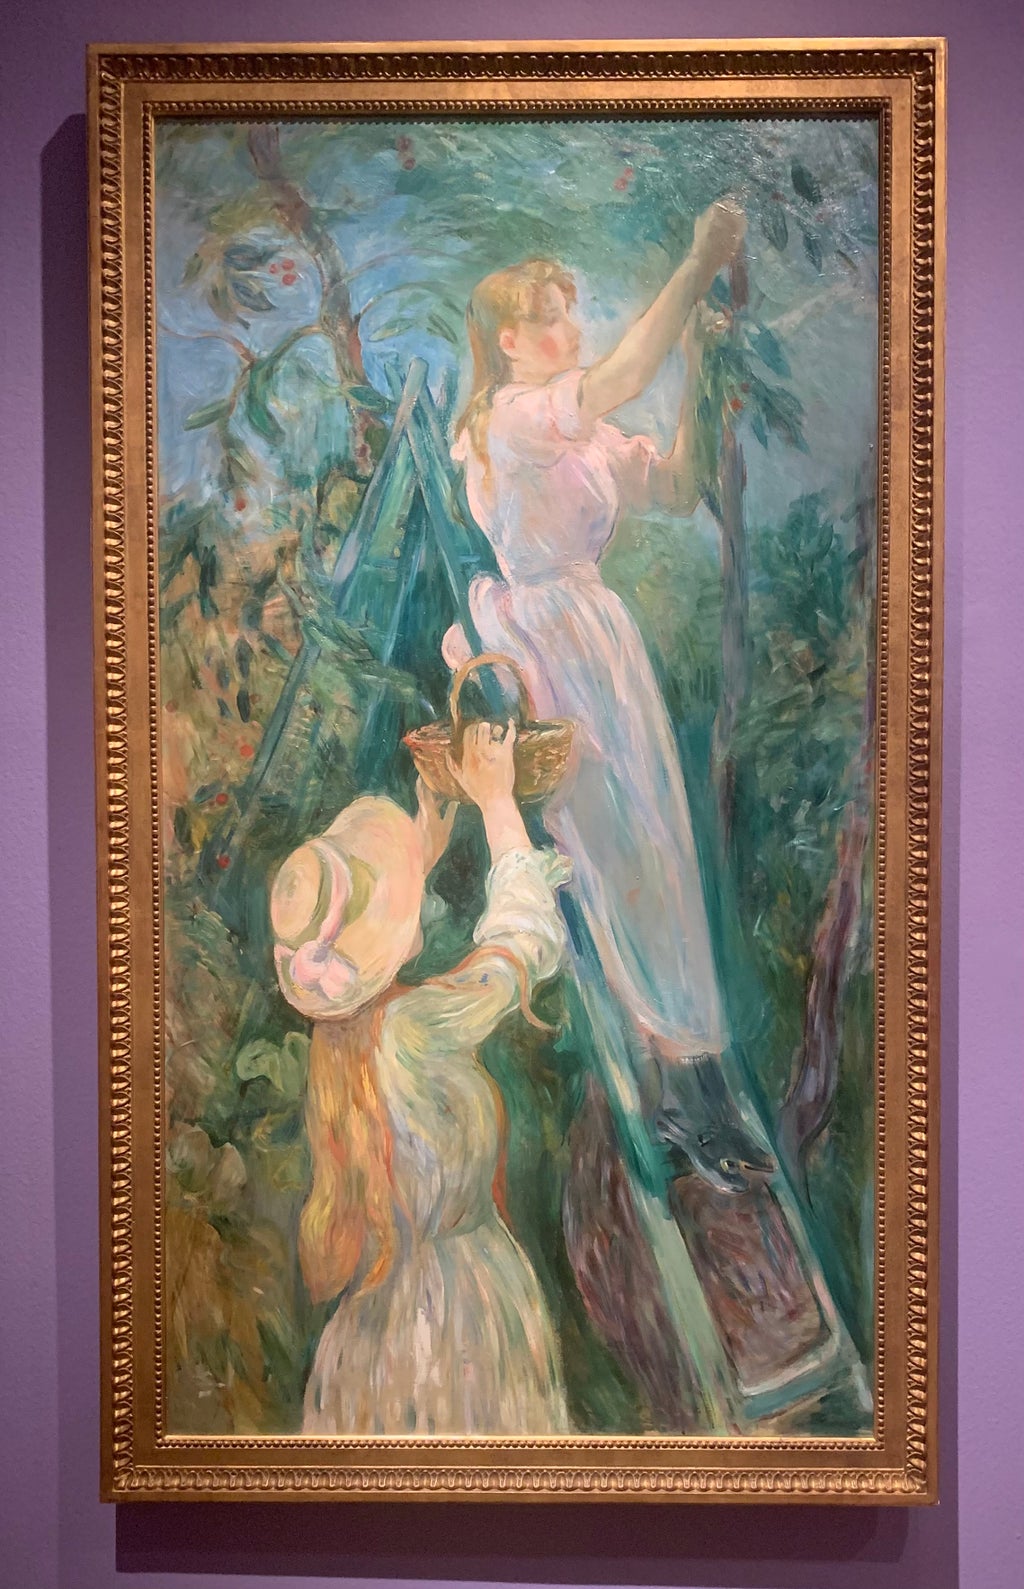 The Cherry Tree by Berthe Morisot (Maestras Exhibition)